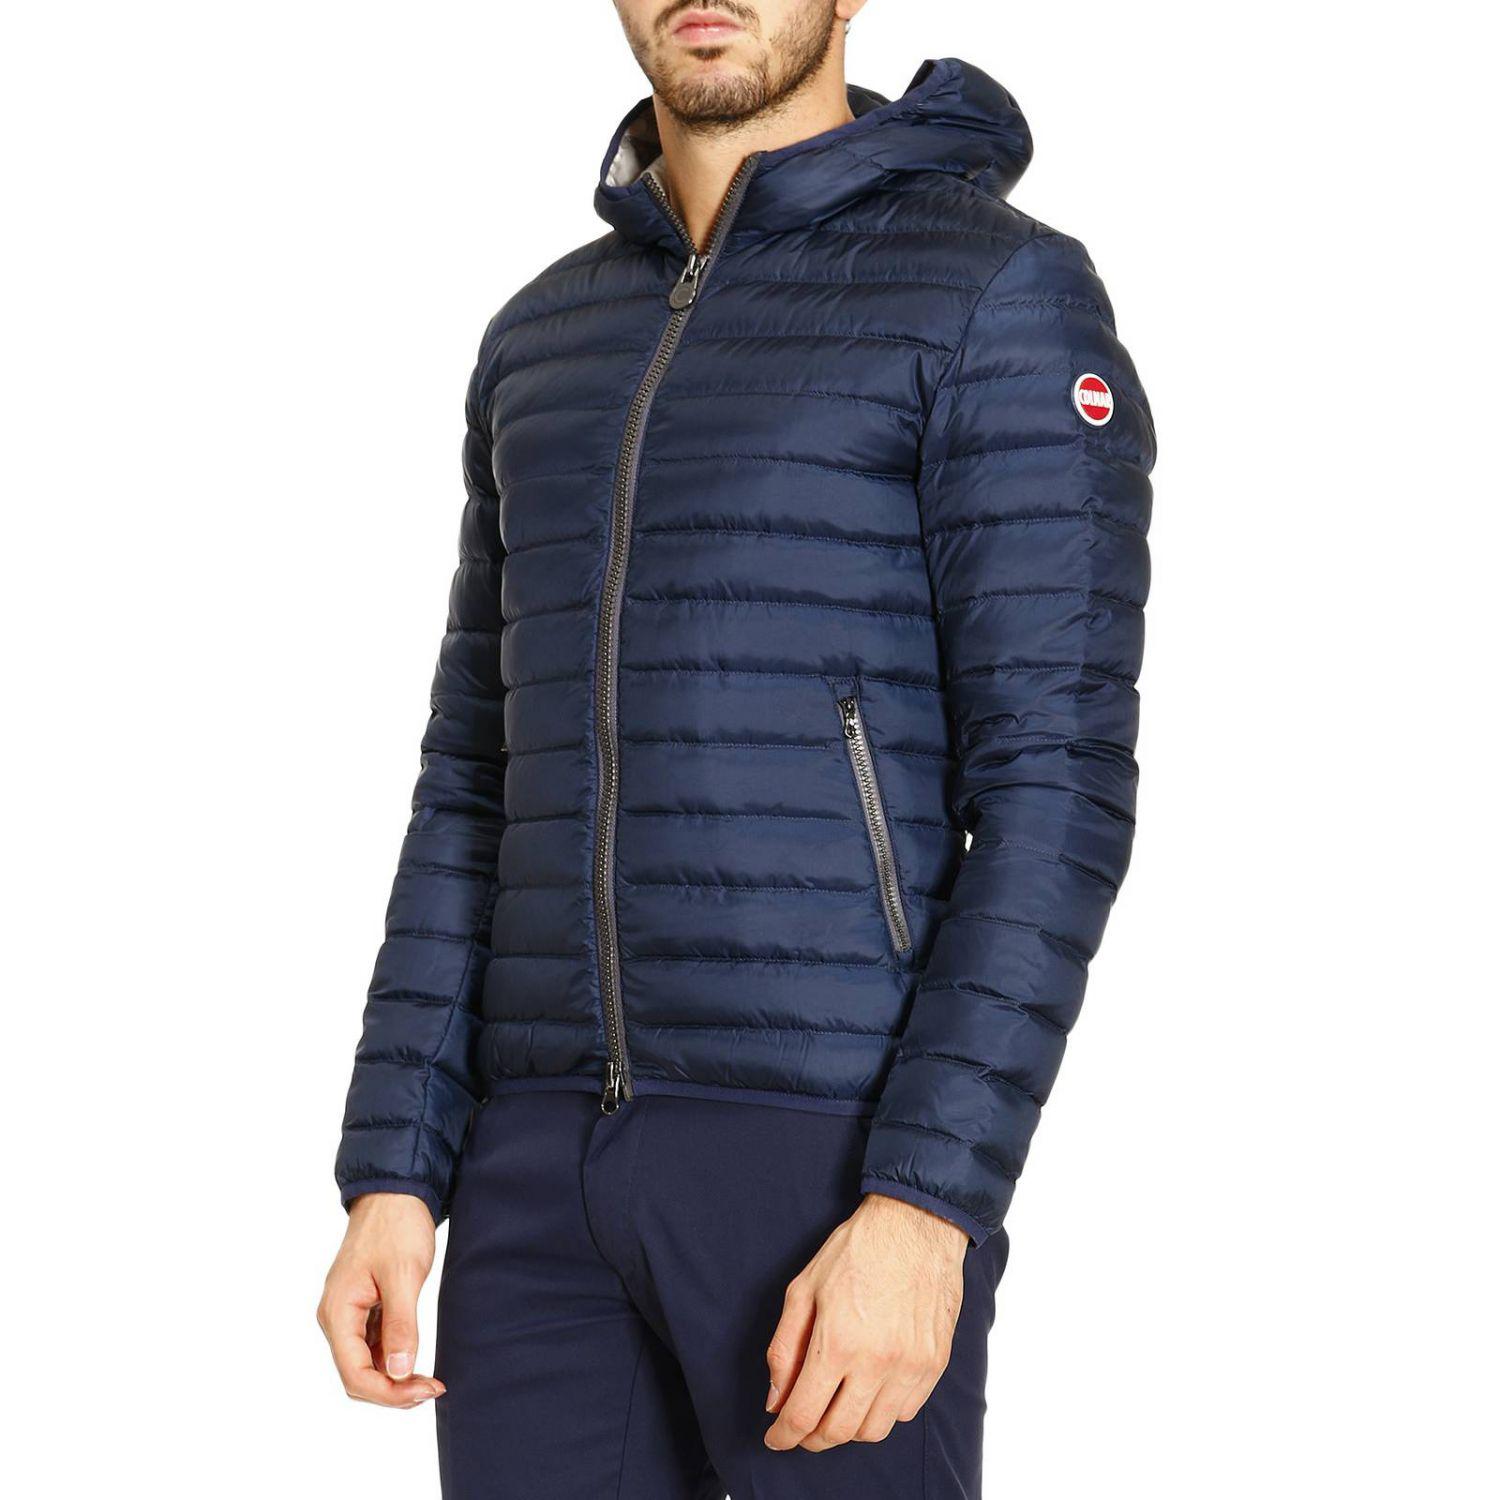 Colmar Synthetic Jackets Man in Navy (Blue) for Men - Lyst